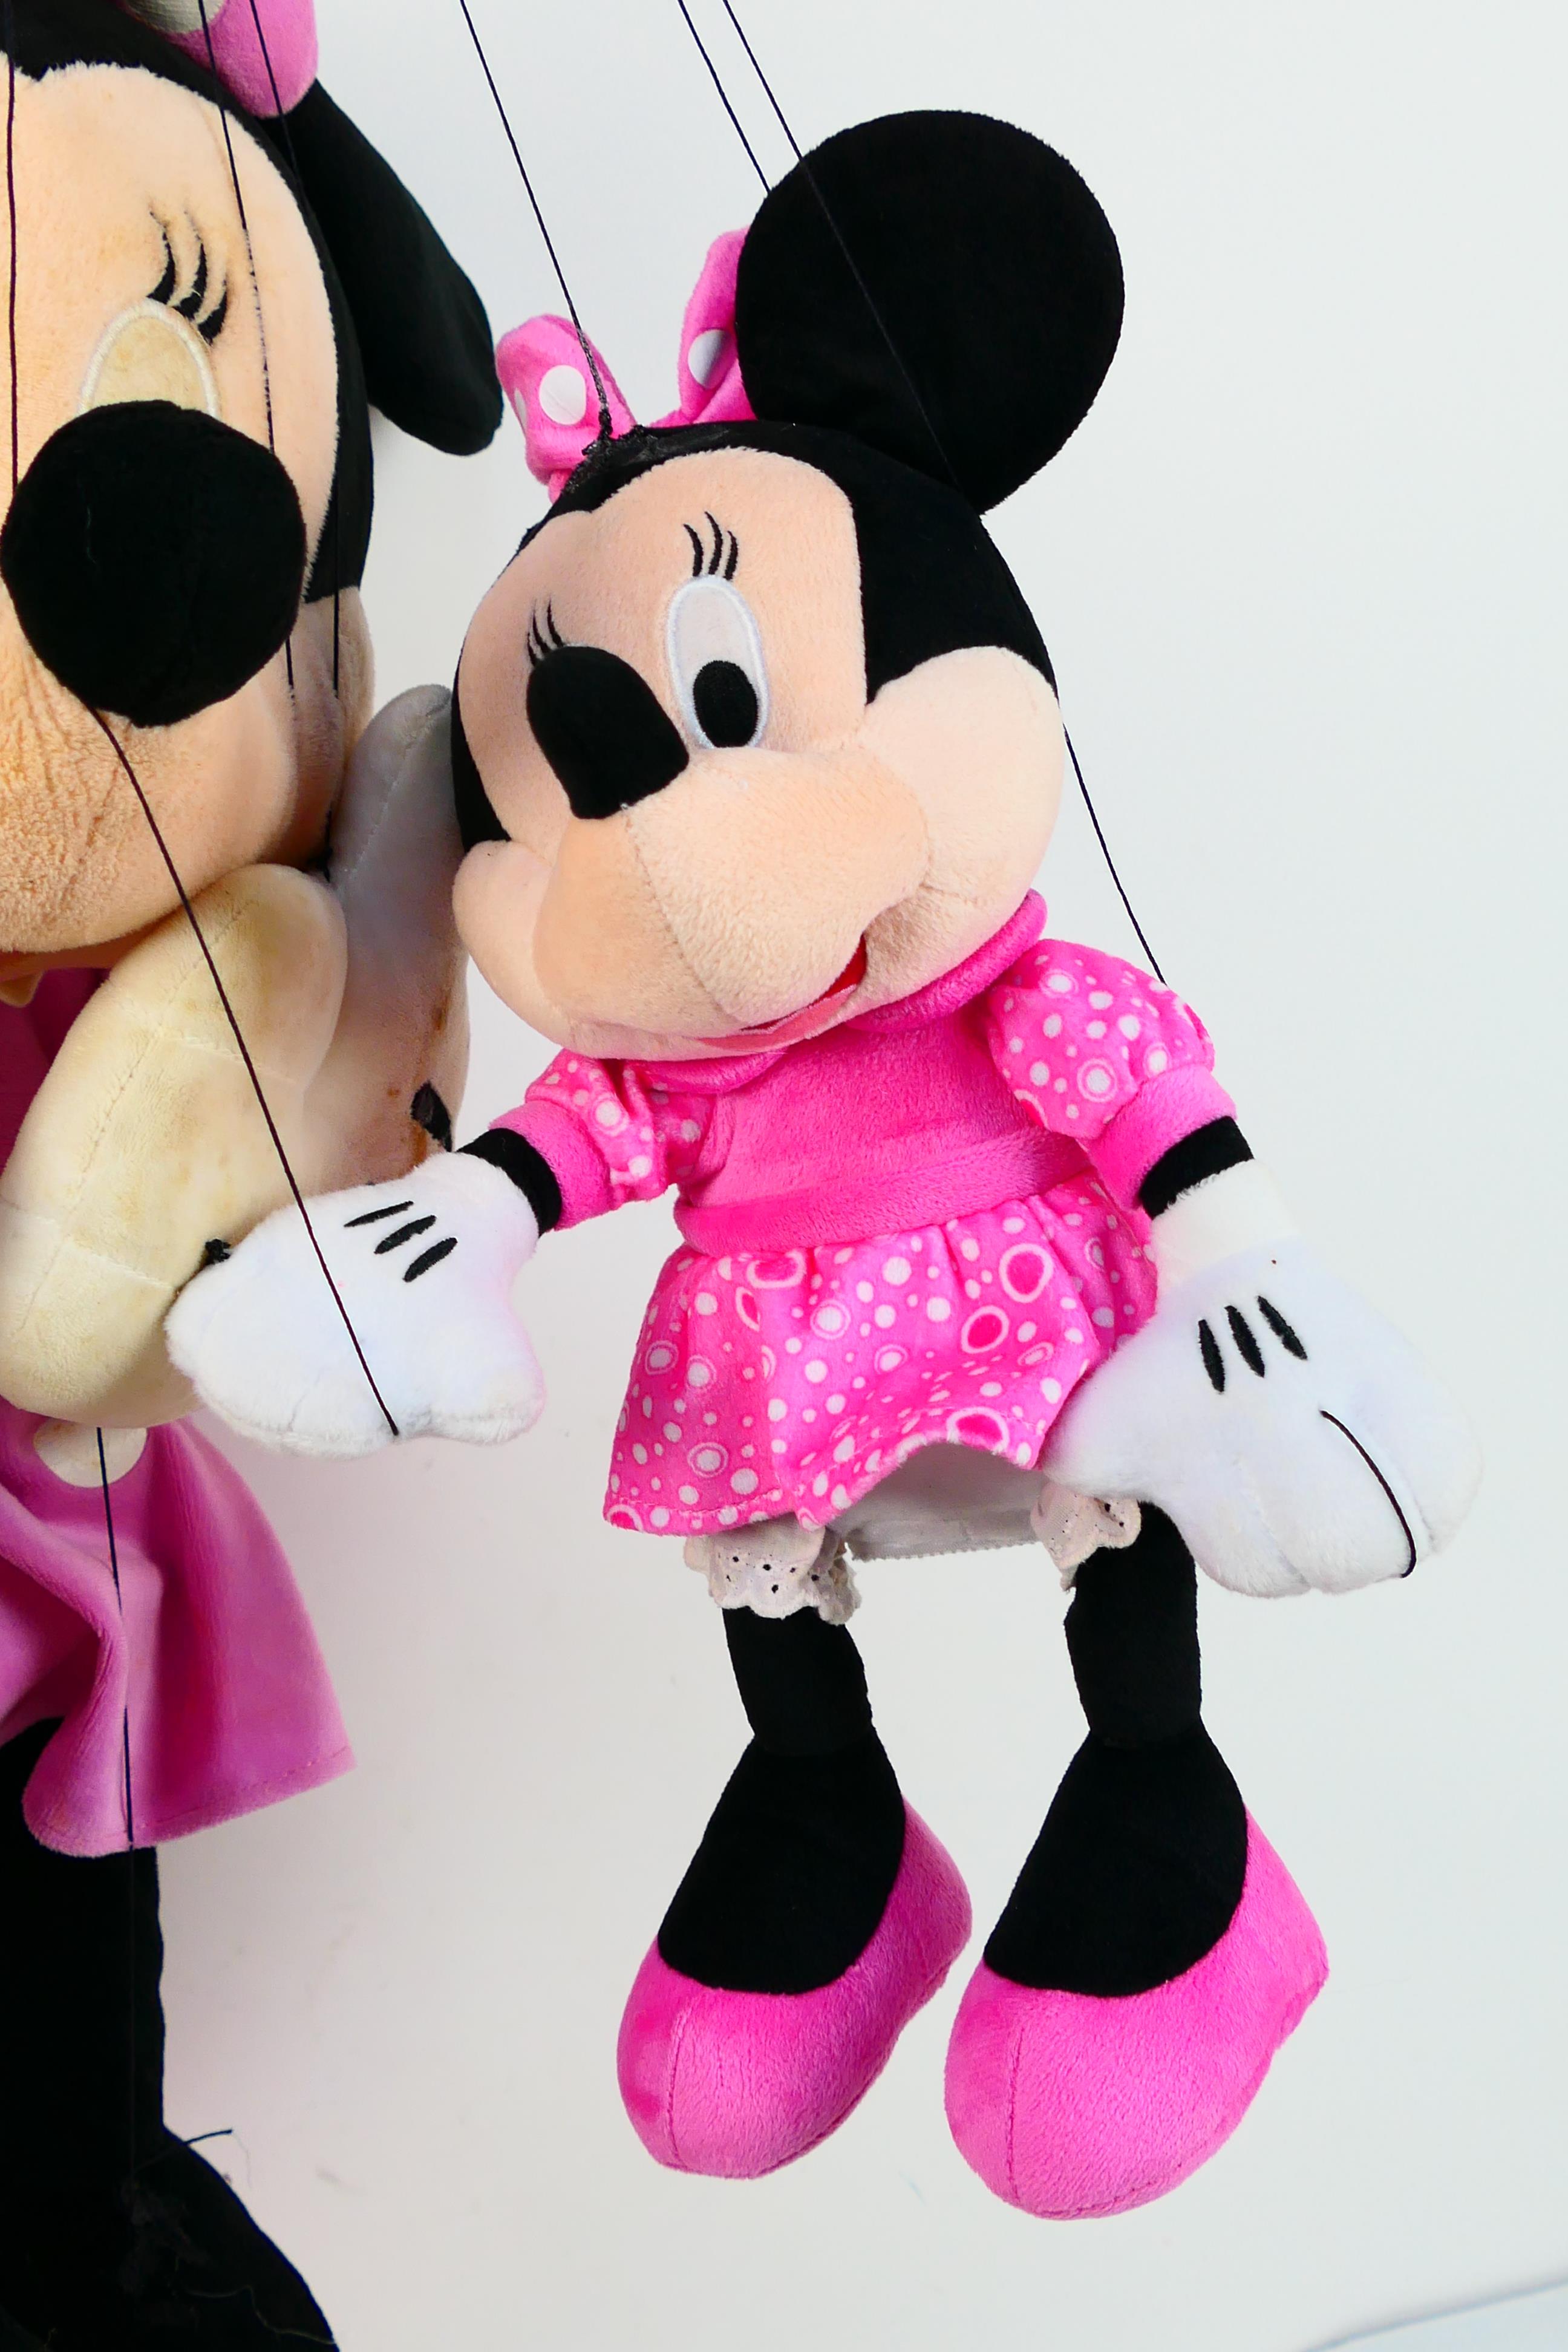 Marionettes - Mickey Mouse - Minnie Mouse. - Image 3 of 5